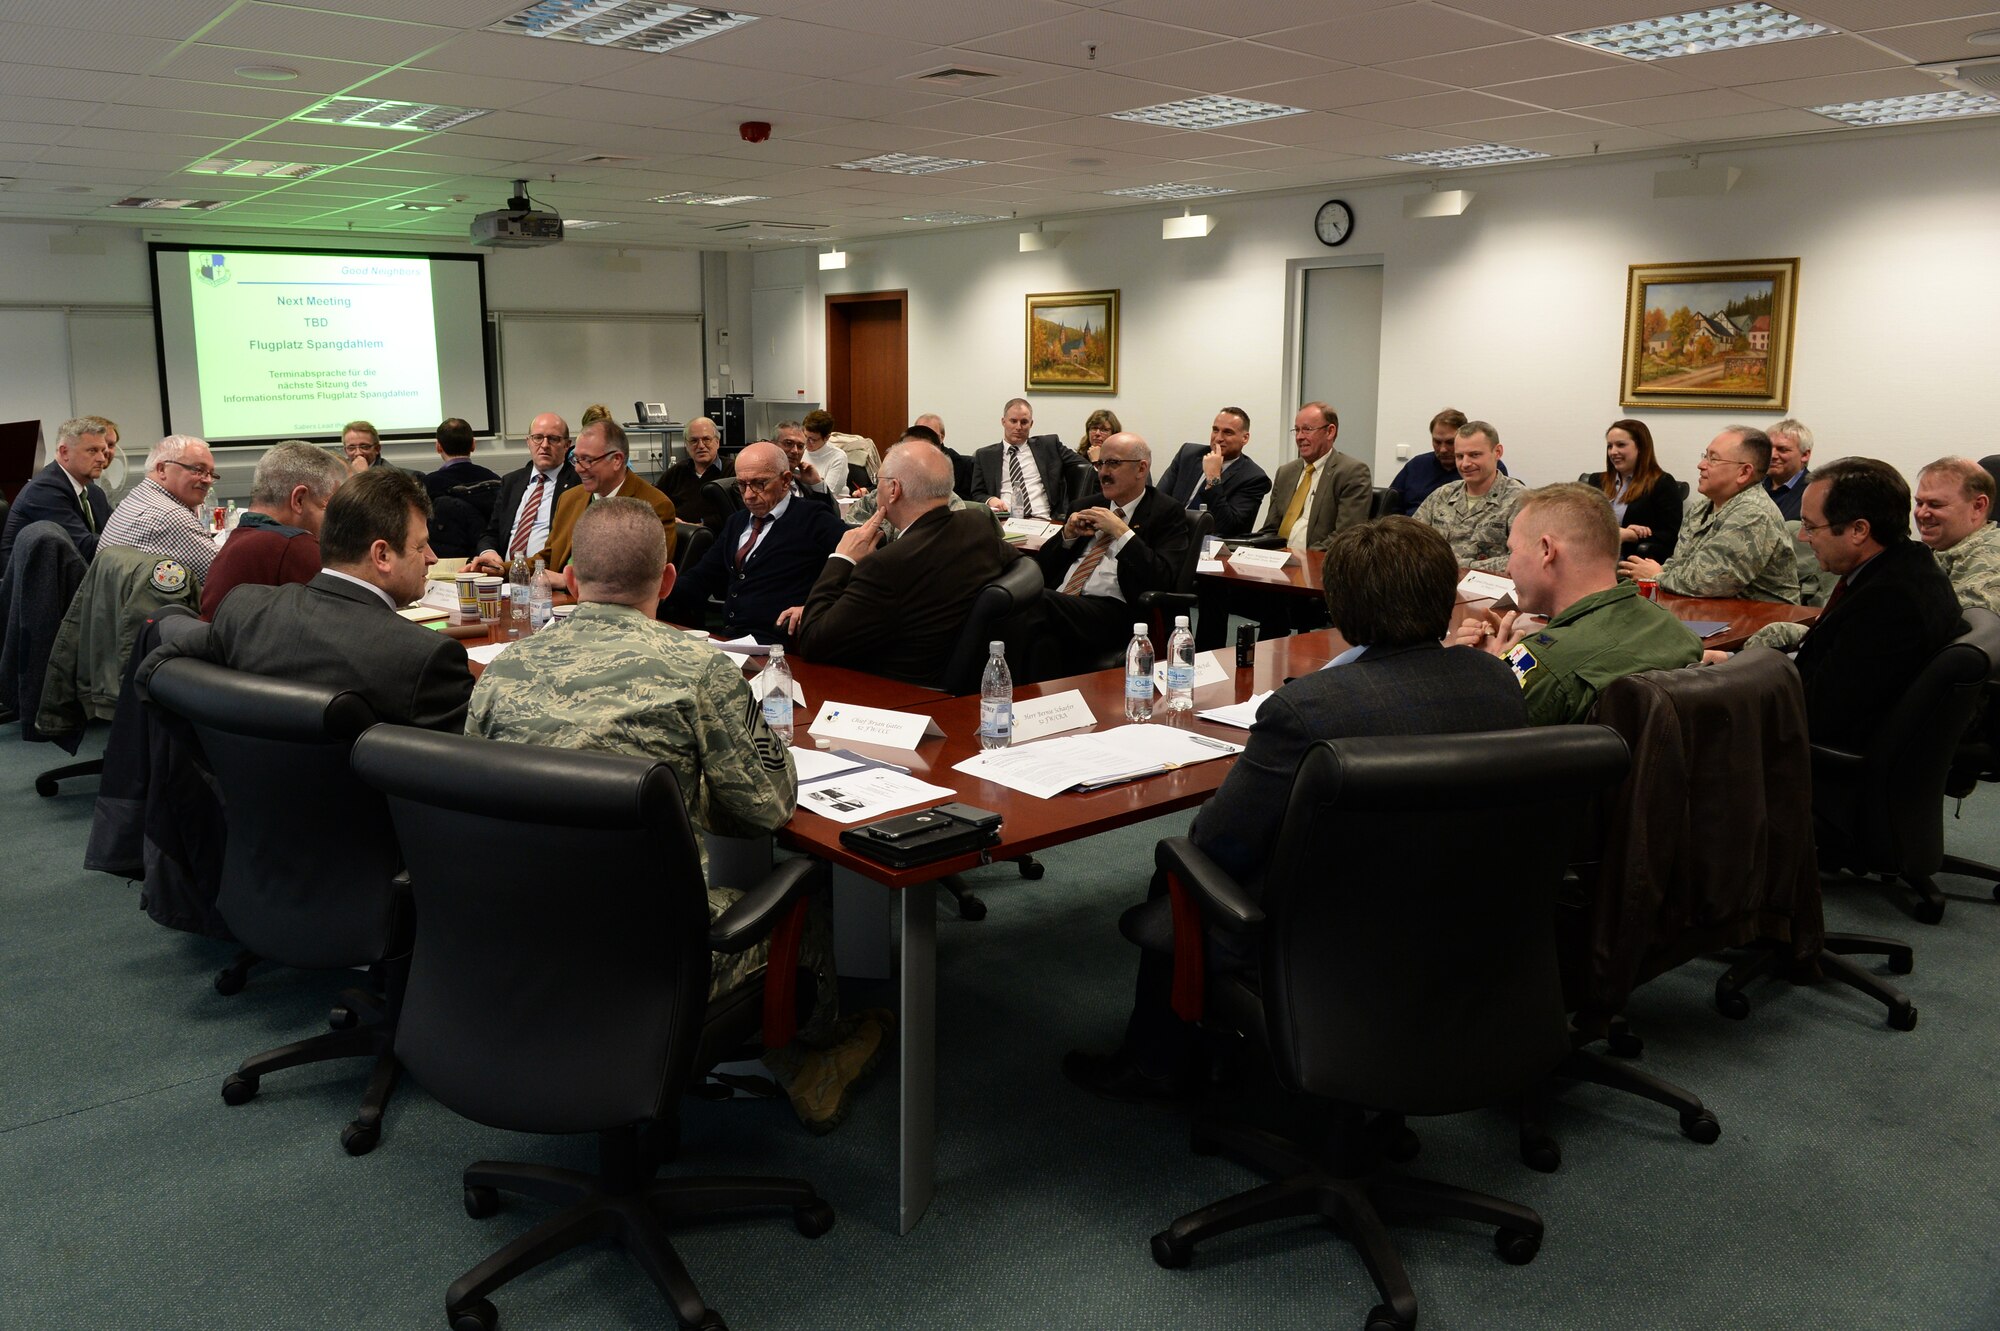 Leaders of the 52nd Fighter Wing and local community engage in an information forum Feb. 20, 2015, at Spangdahlem Air Base, Germany. The forum aimed to strengthen the partnership between Germany and the U.S. by updating local community leaders about upcoming base projects, issues and a question-and-answer portion. (U.S. Air Force photo by Senior Airman Dylan Nuckolls/Released)